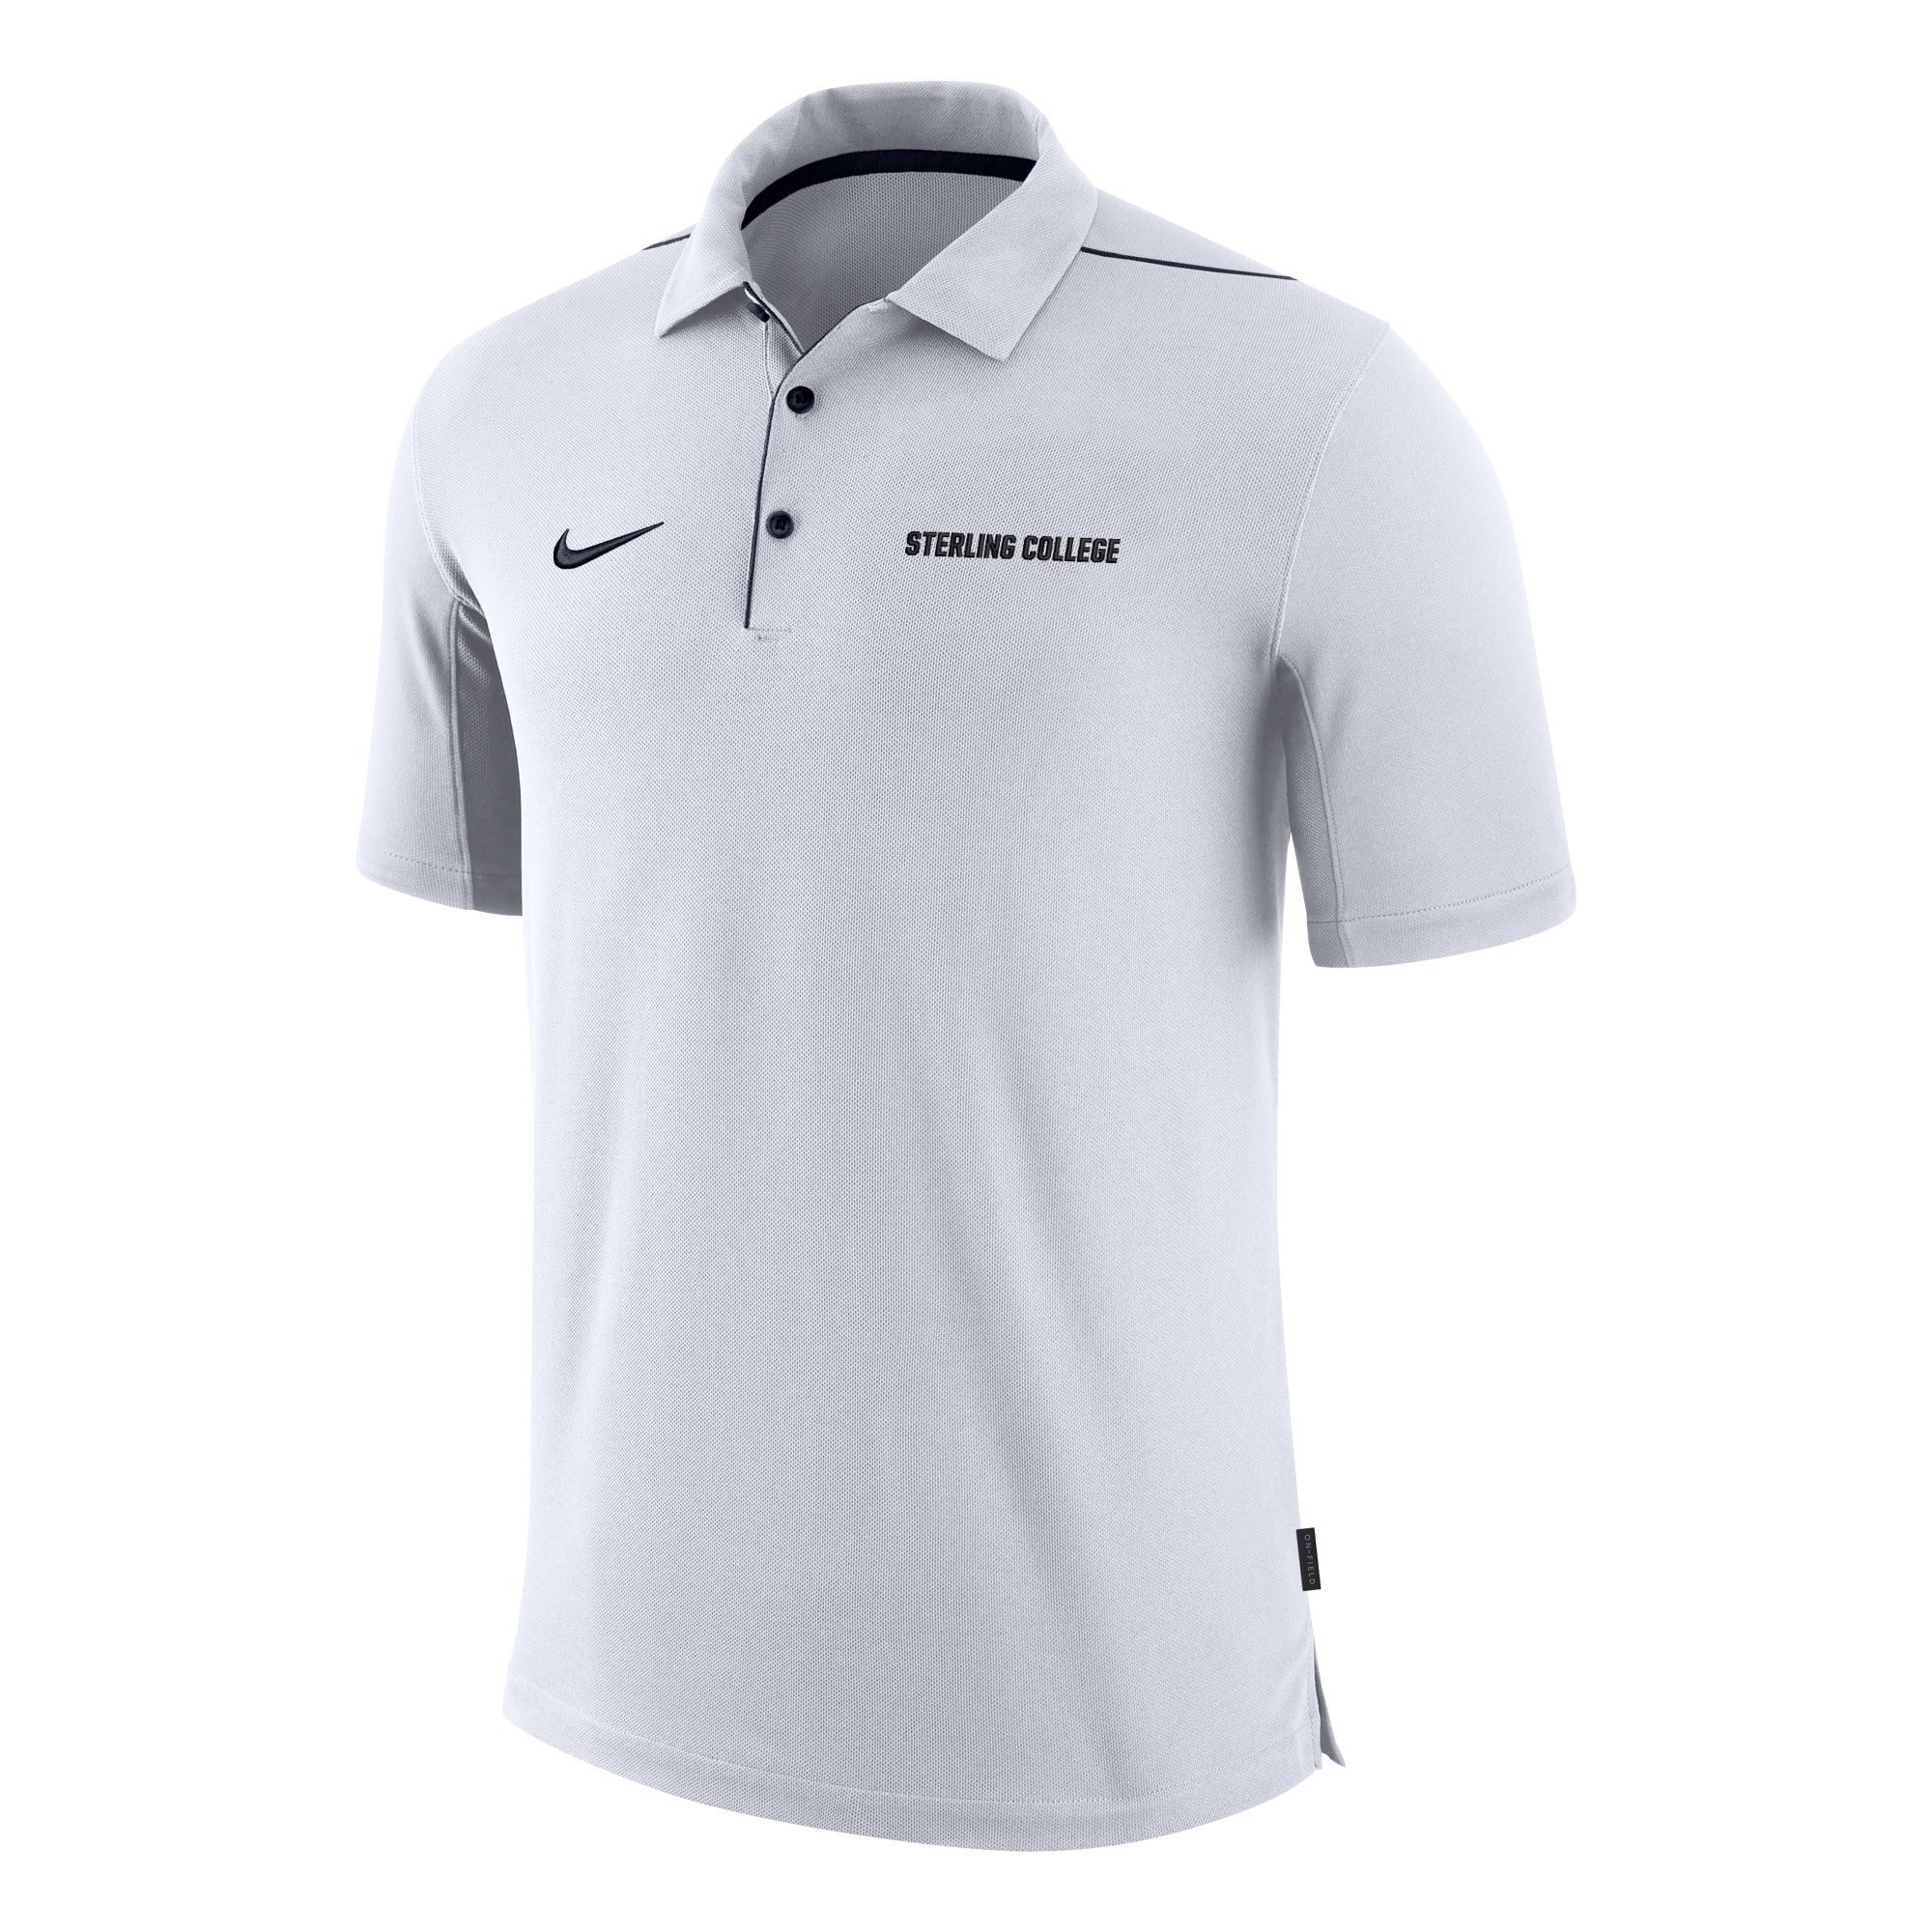 Nike Team Issue Polo - White & Navy - Sterling College Bookstore